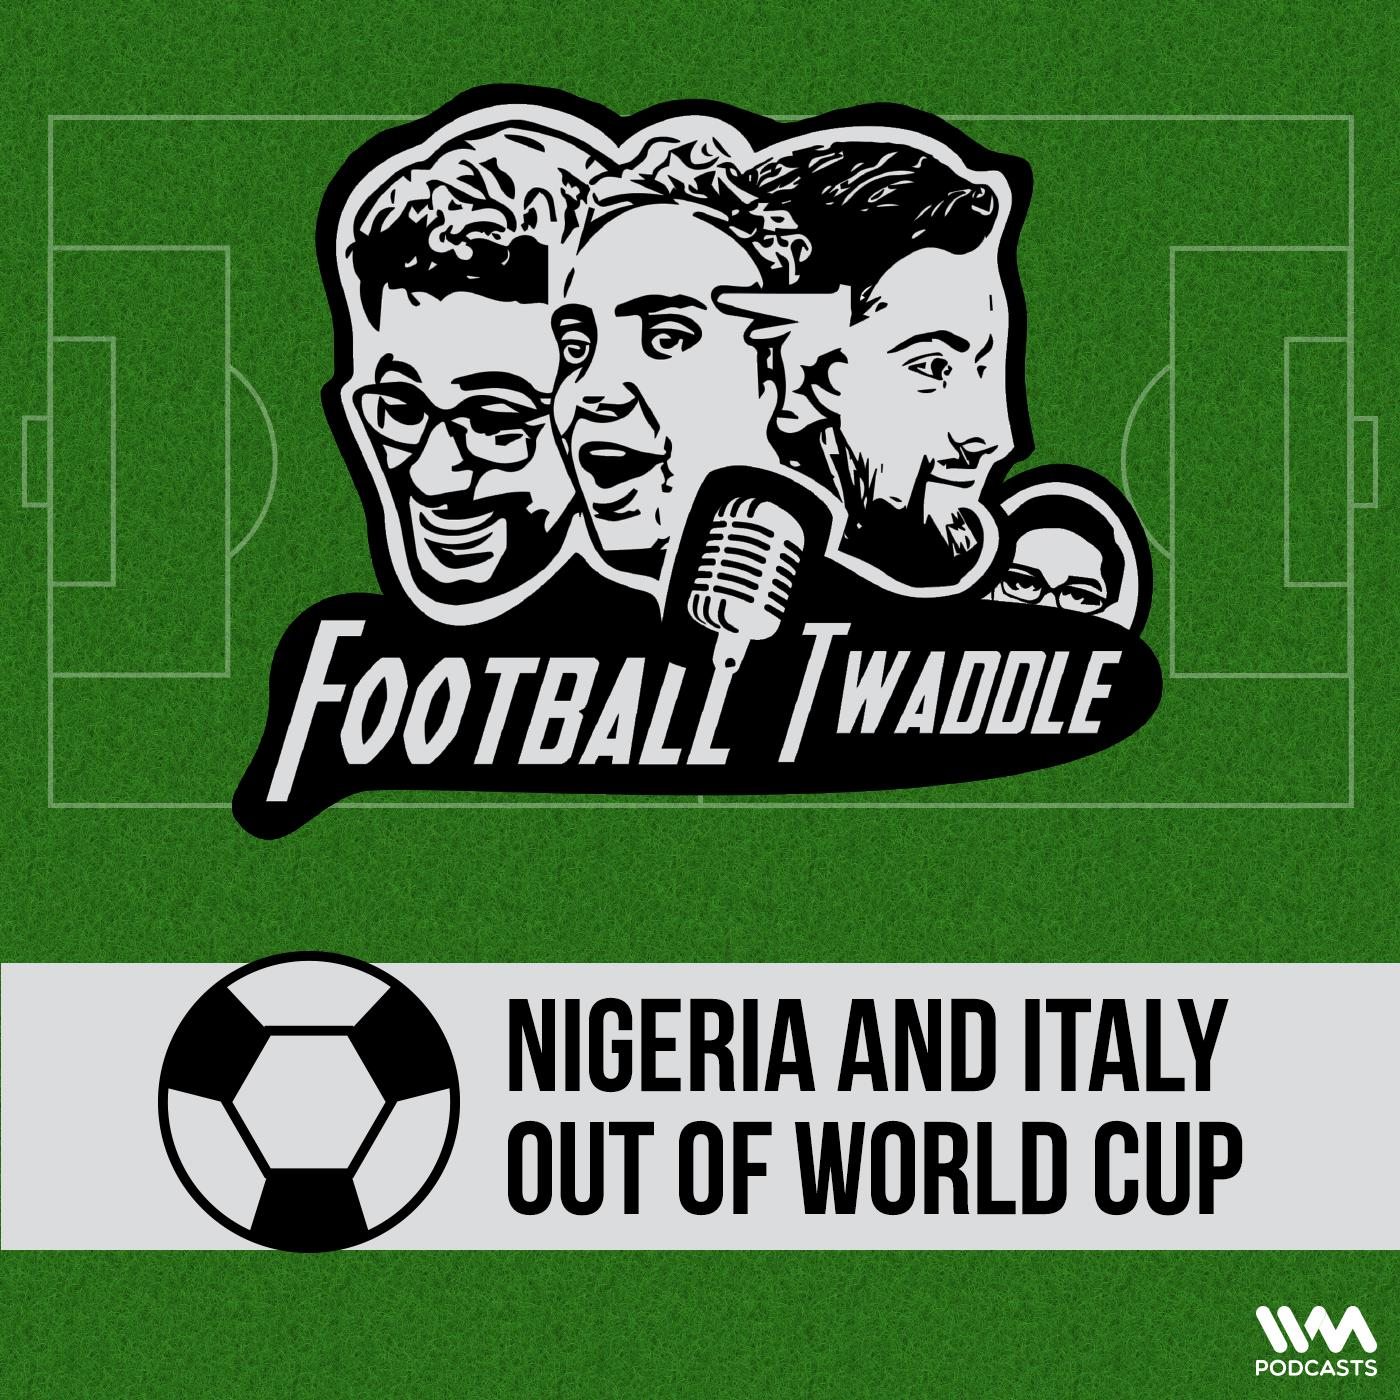 Nigeria and Italy out of World Cup